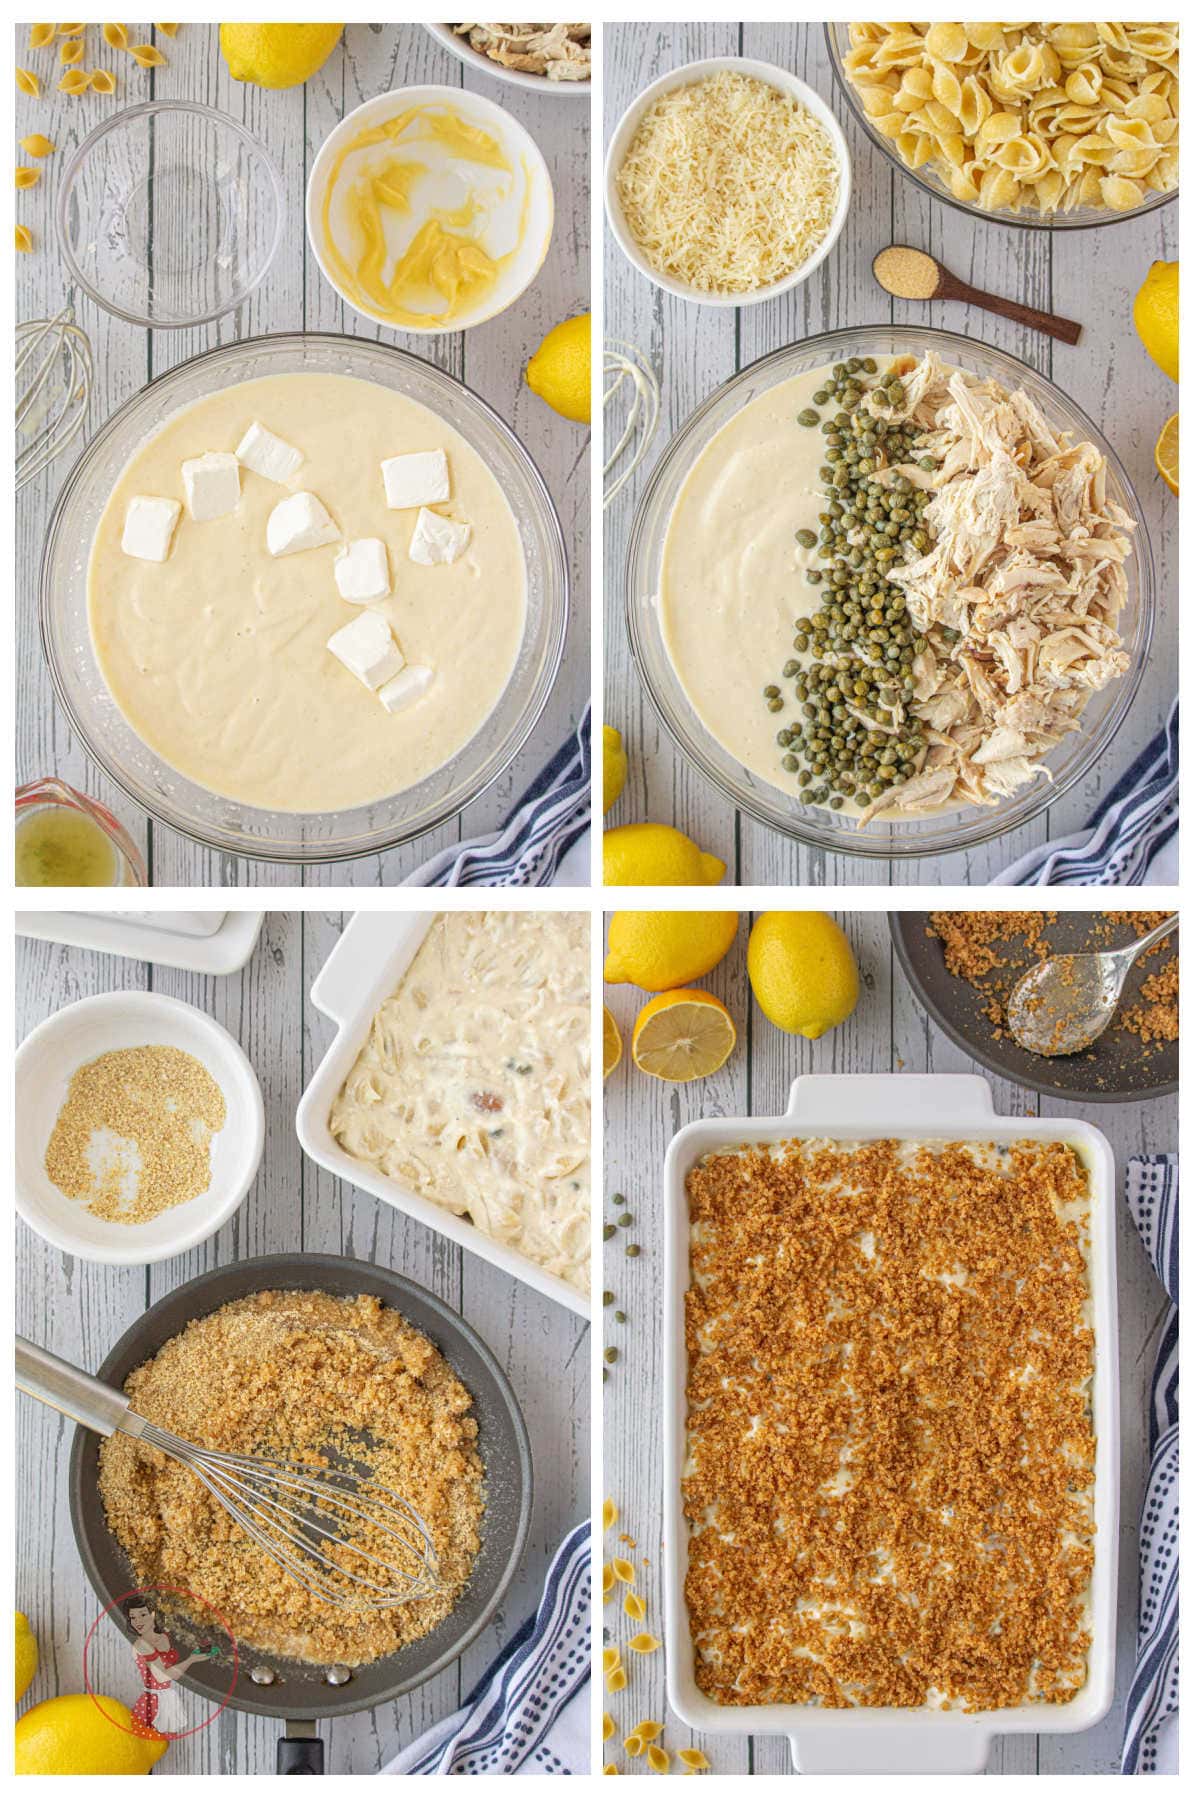 Step by step images showing how to make chicken piccata casserole.